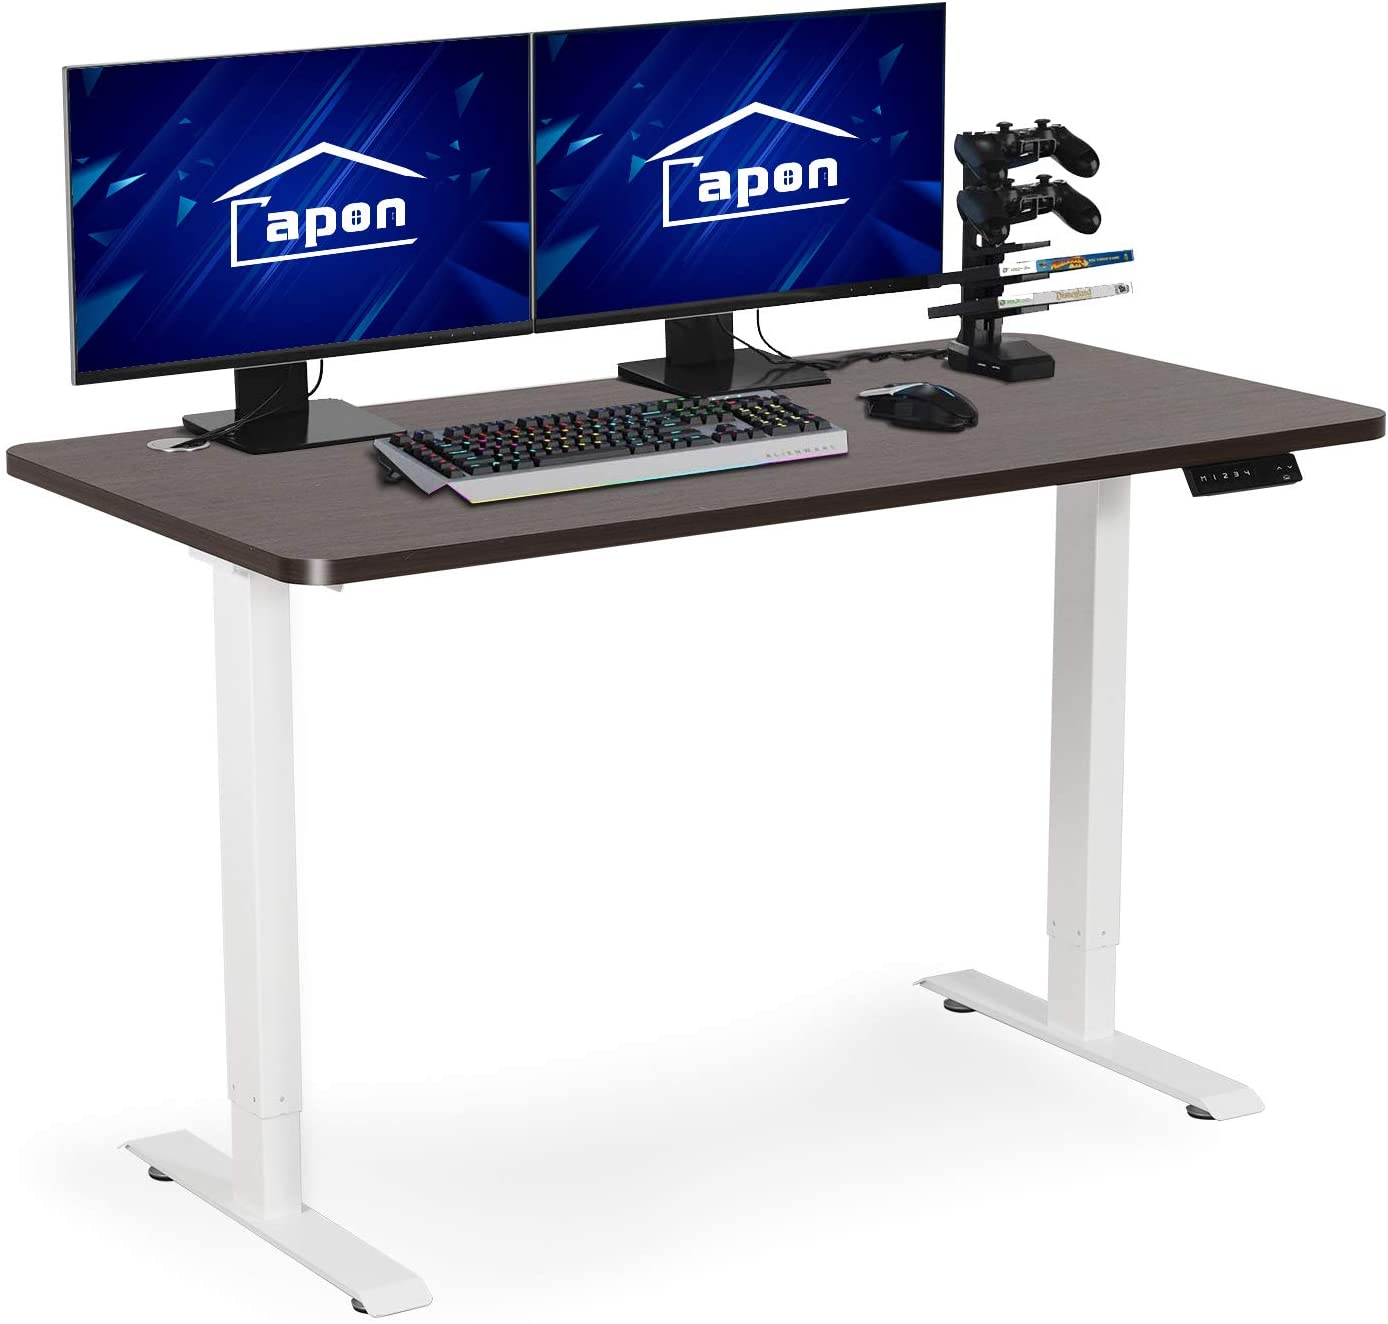 Adjustable Height Desk, 48 x 24 inch Sitting and Standing Computer Desk for Home Office, Capon Dual Motorized Sit Stand Gaming Desk with Cable Management, One Piece Top Electric Stand Up Desk, Black